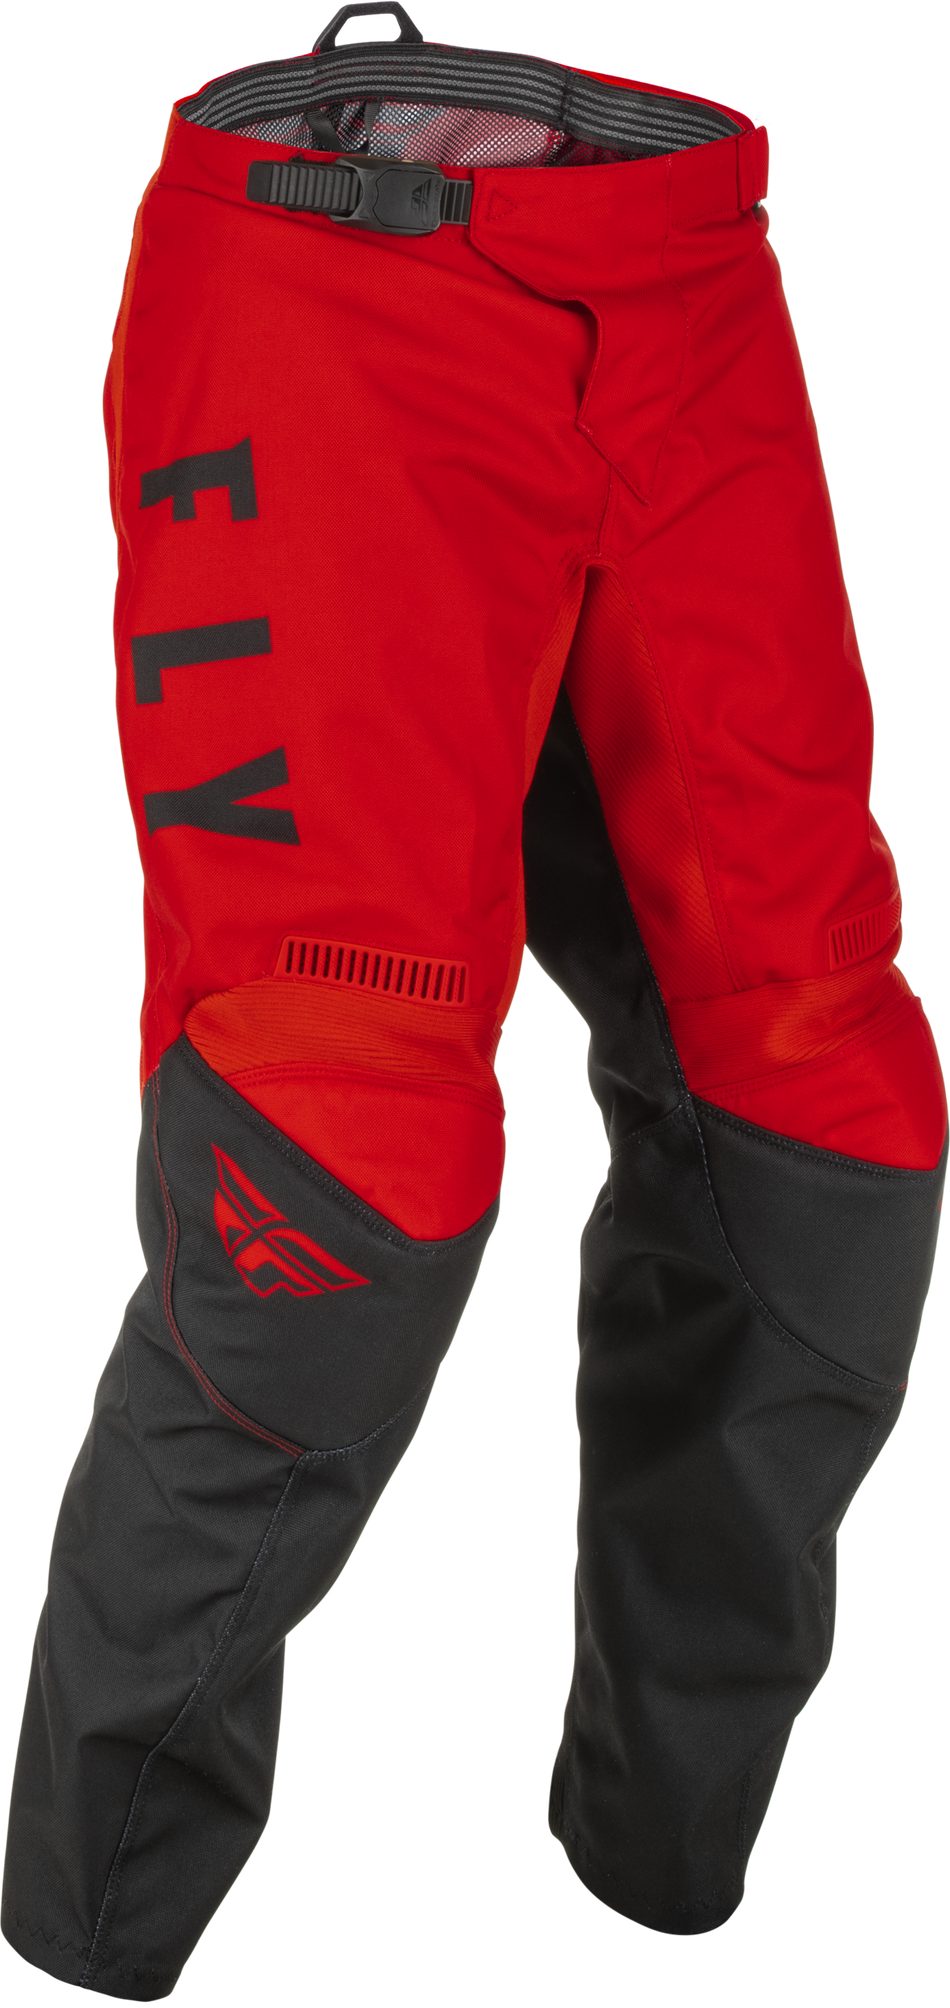 FLY RACING Youth F-16 Pants Red/Black Sz 20 375-93320